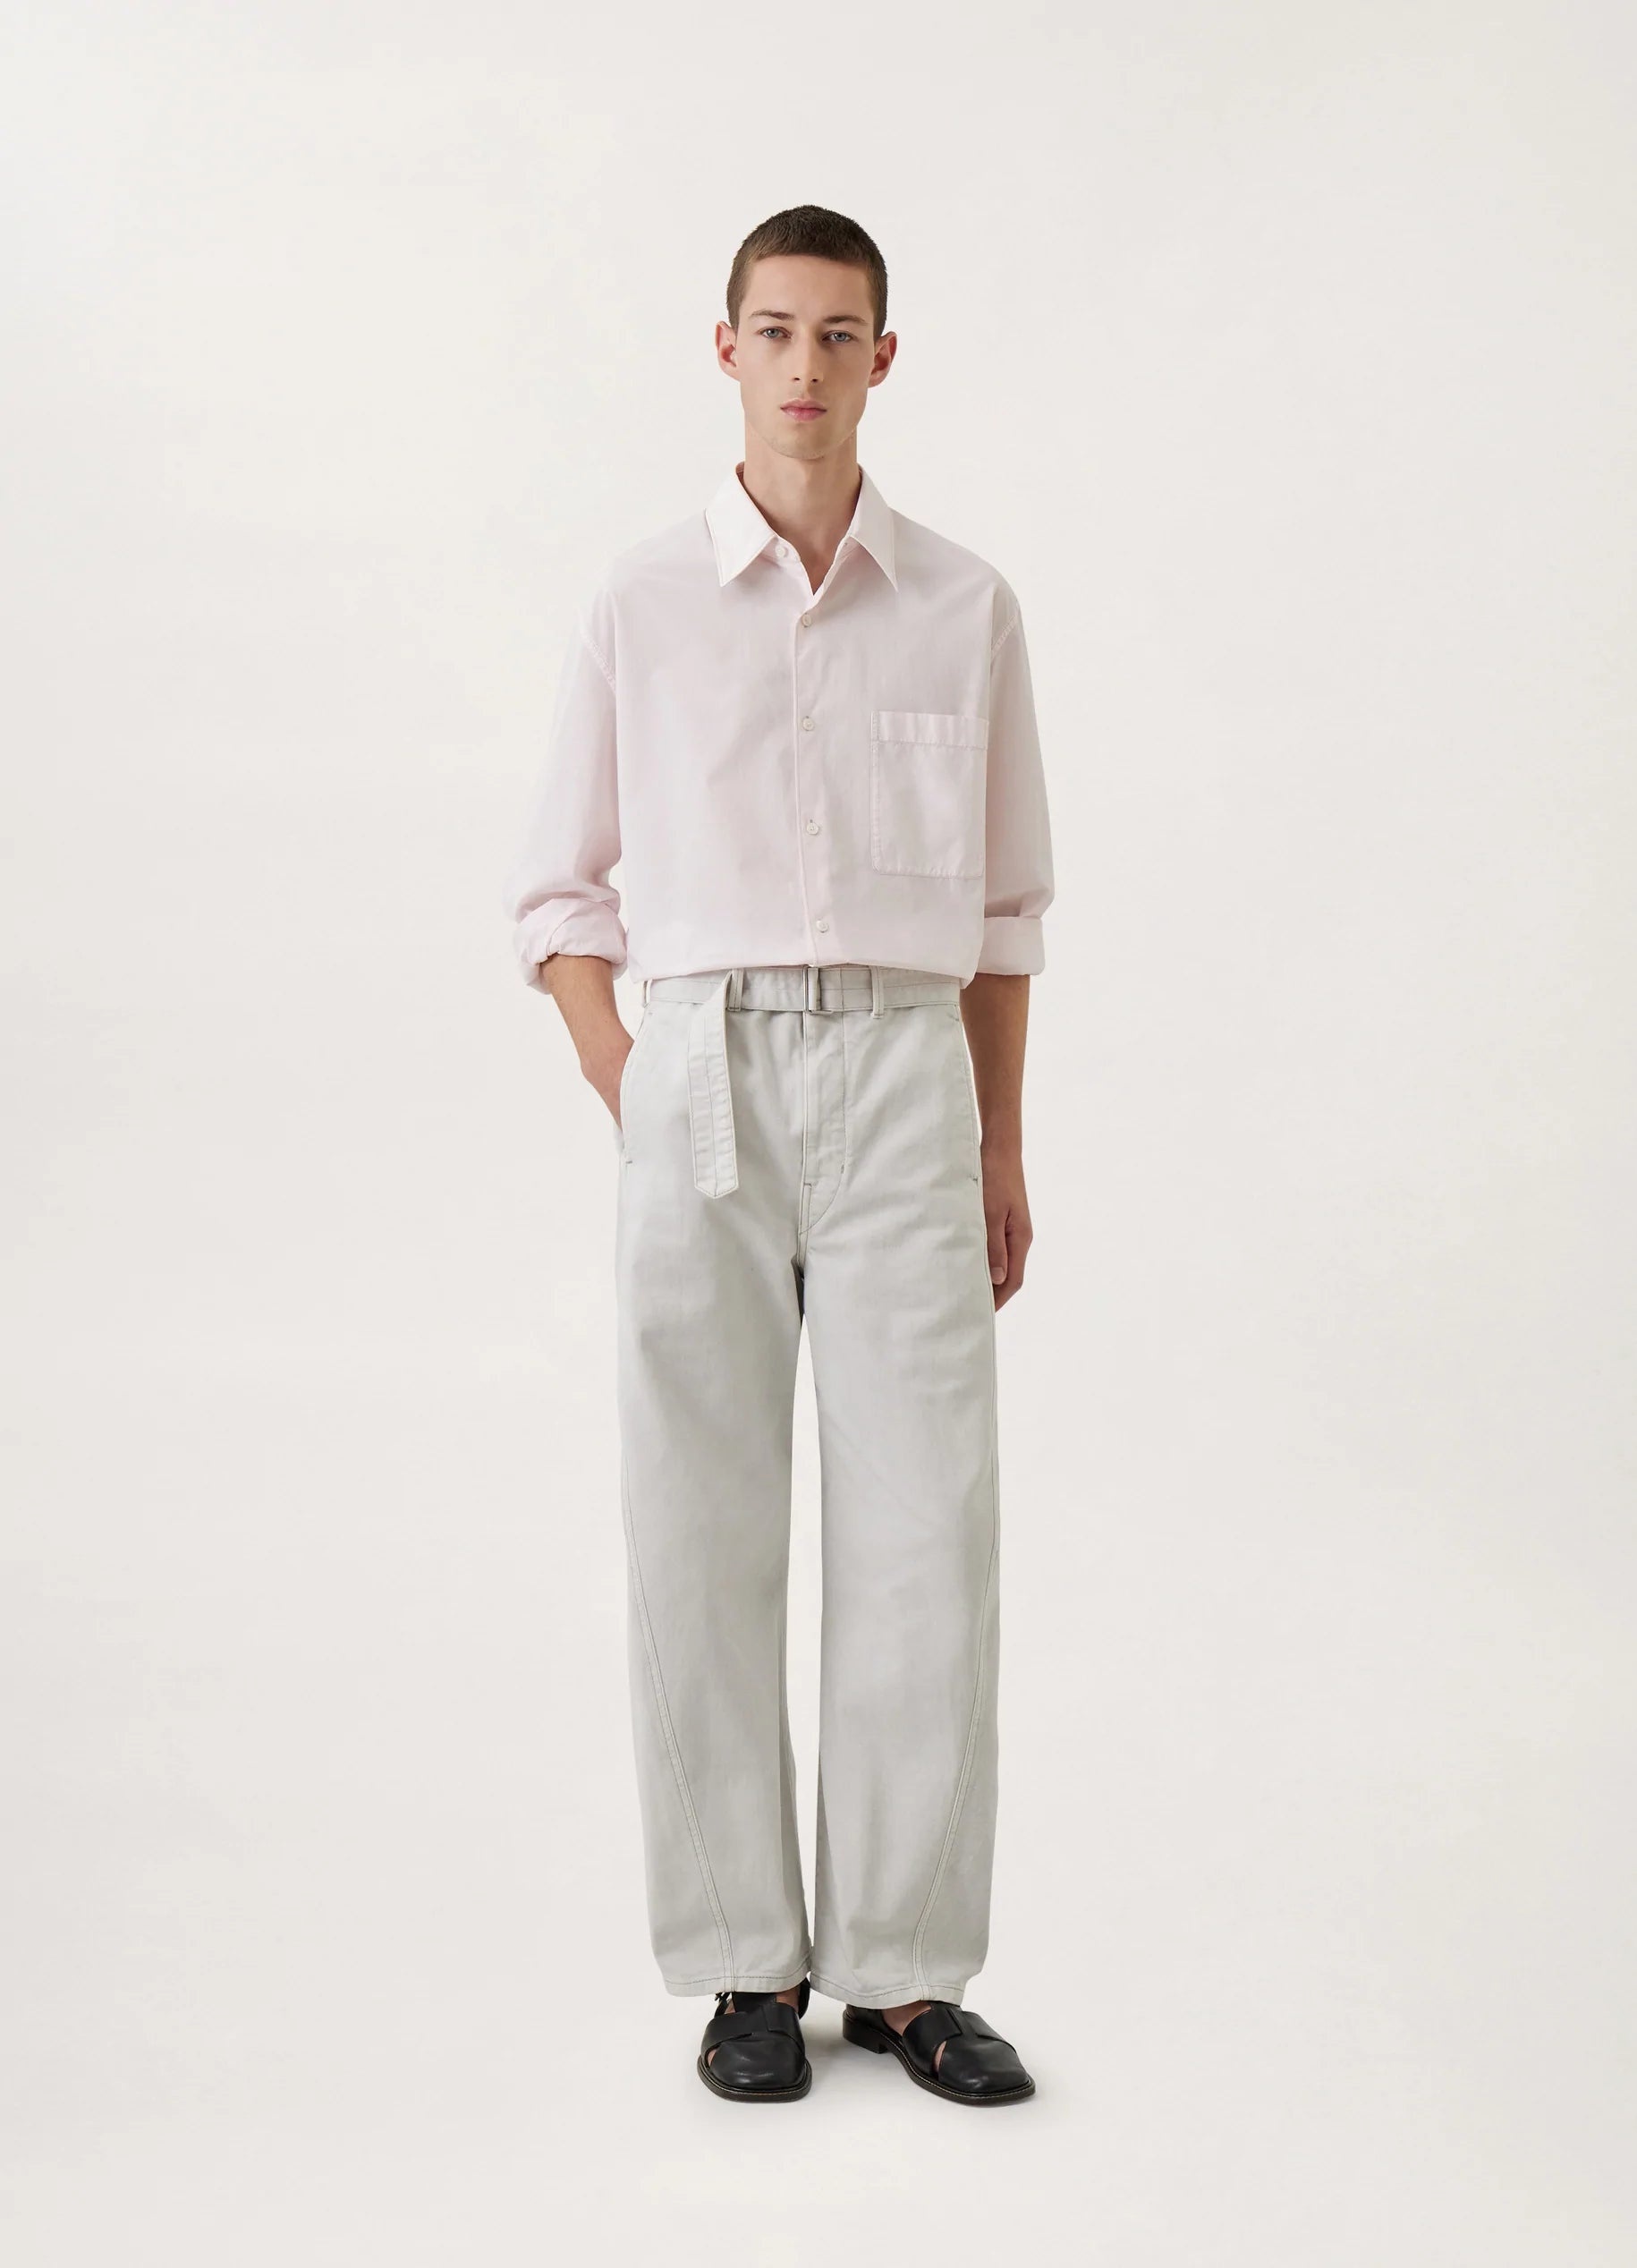 LEMAIER TWISTED BELTED PANTS ホワイト46 - デニム/ジーンズ